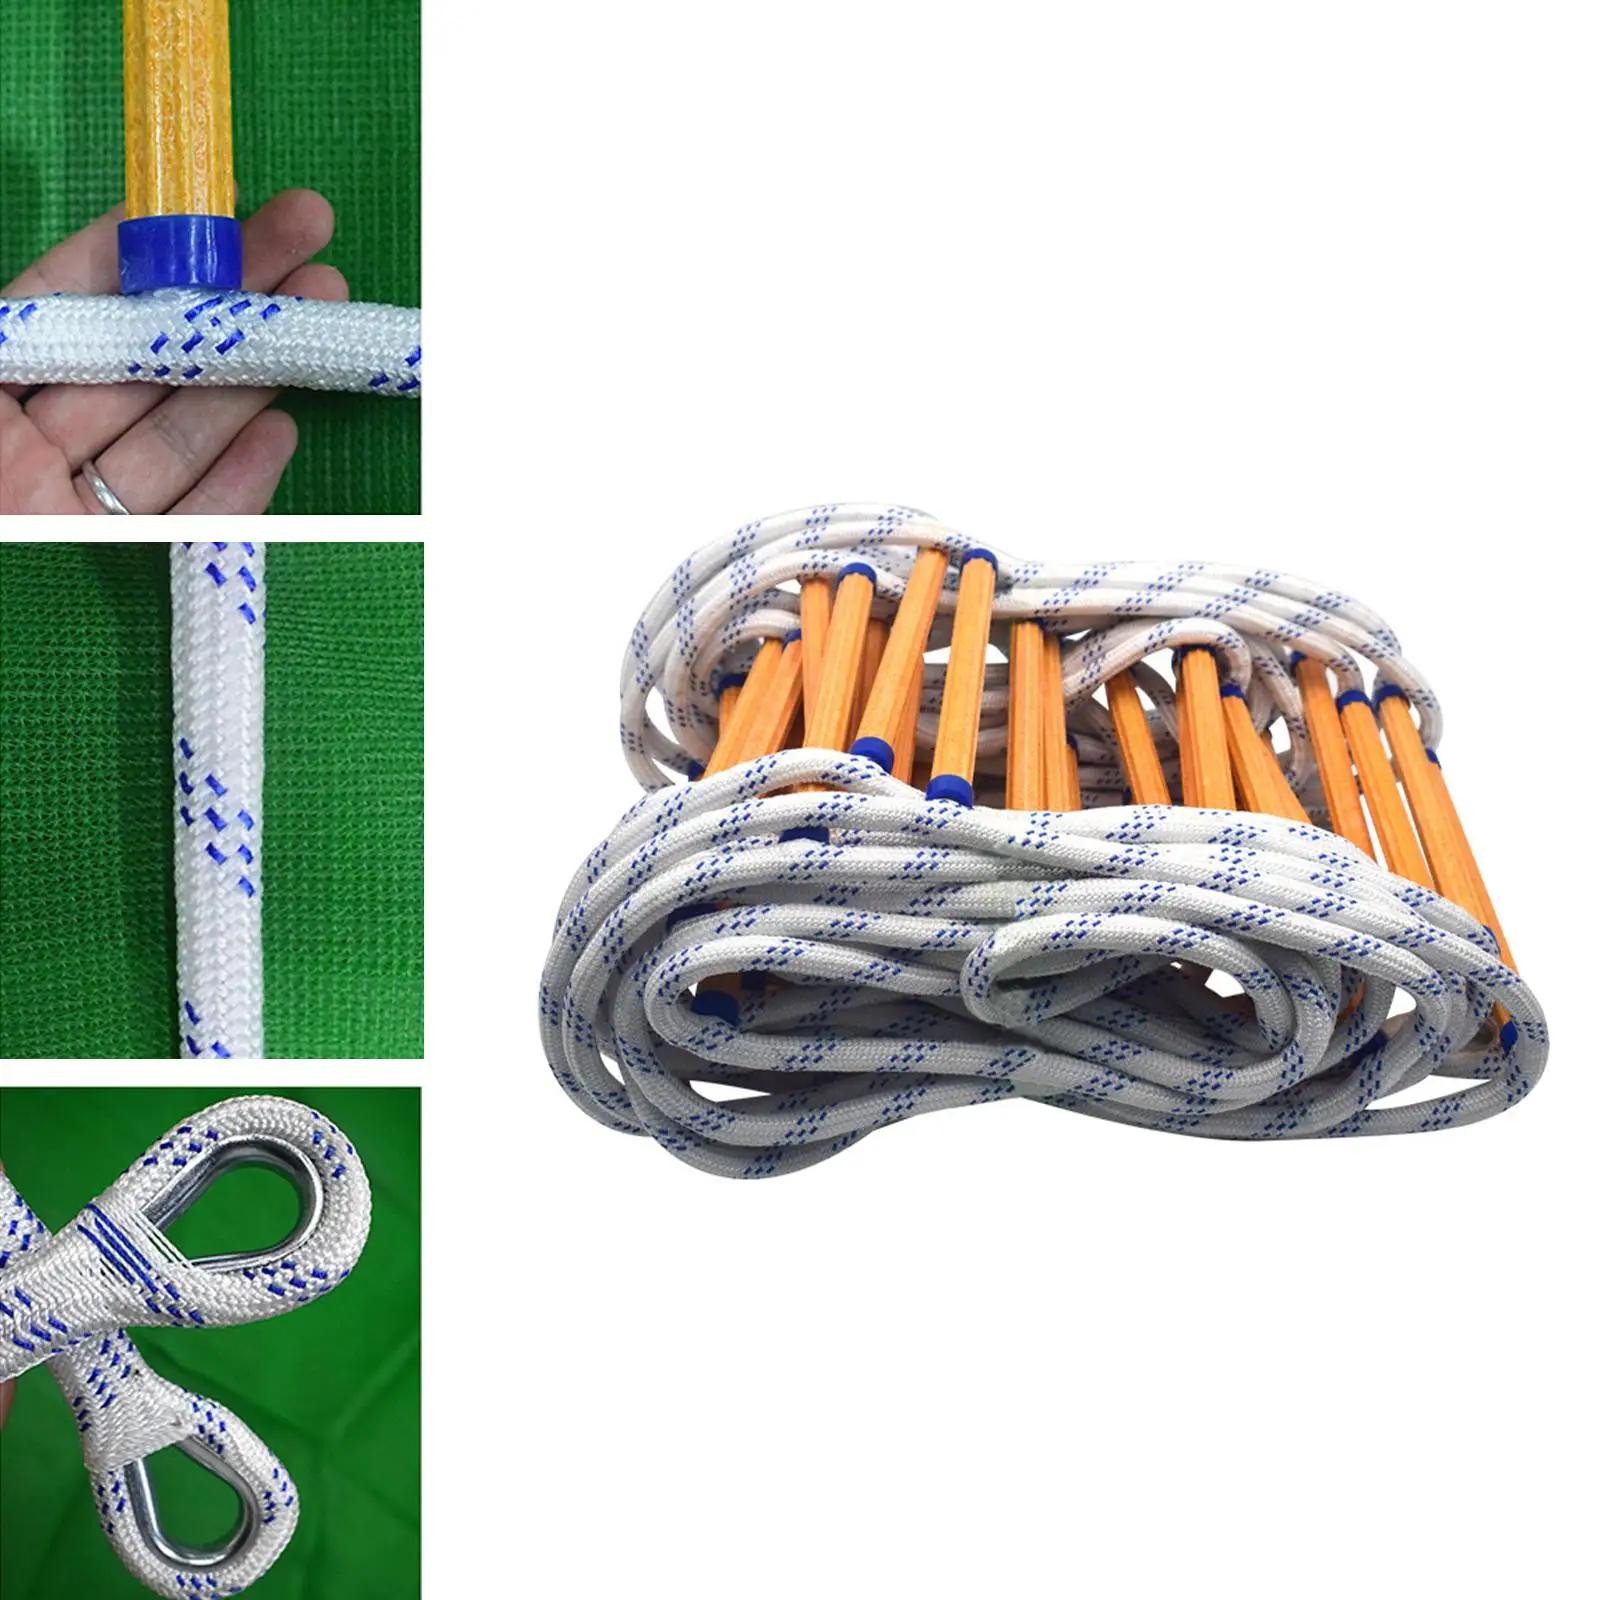   Fire Escape Ladder Soft Rope Fast to Deploy Reusable Kids Adults Flame Resistant for Engineering Climbing Outdoor